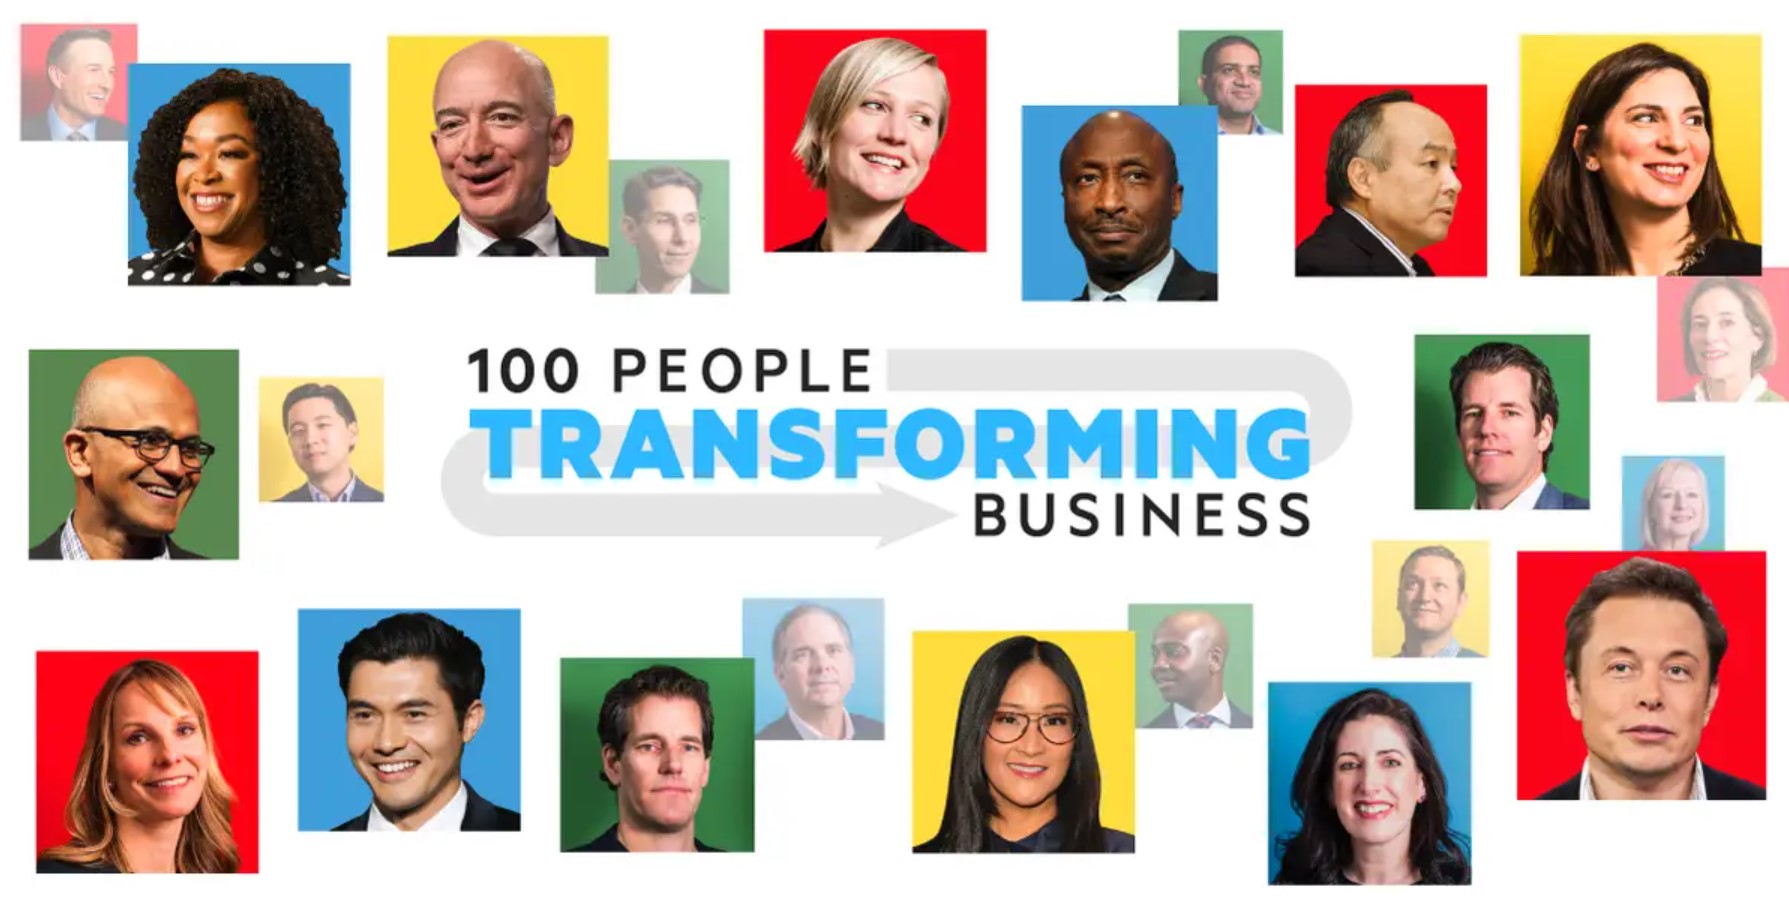 Business Insider names Jill Houghton, President & CEO of Disability:IN, as one of 100 People Transforming Business